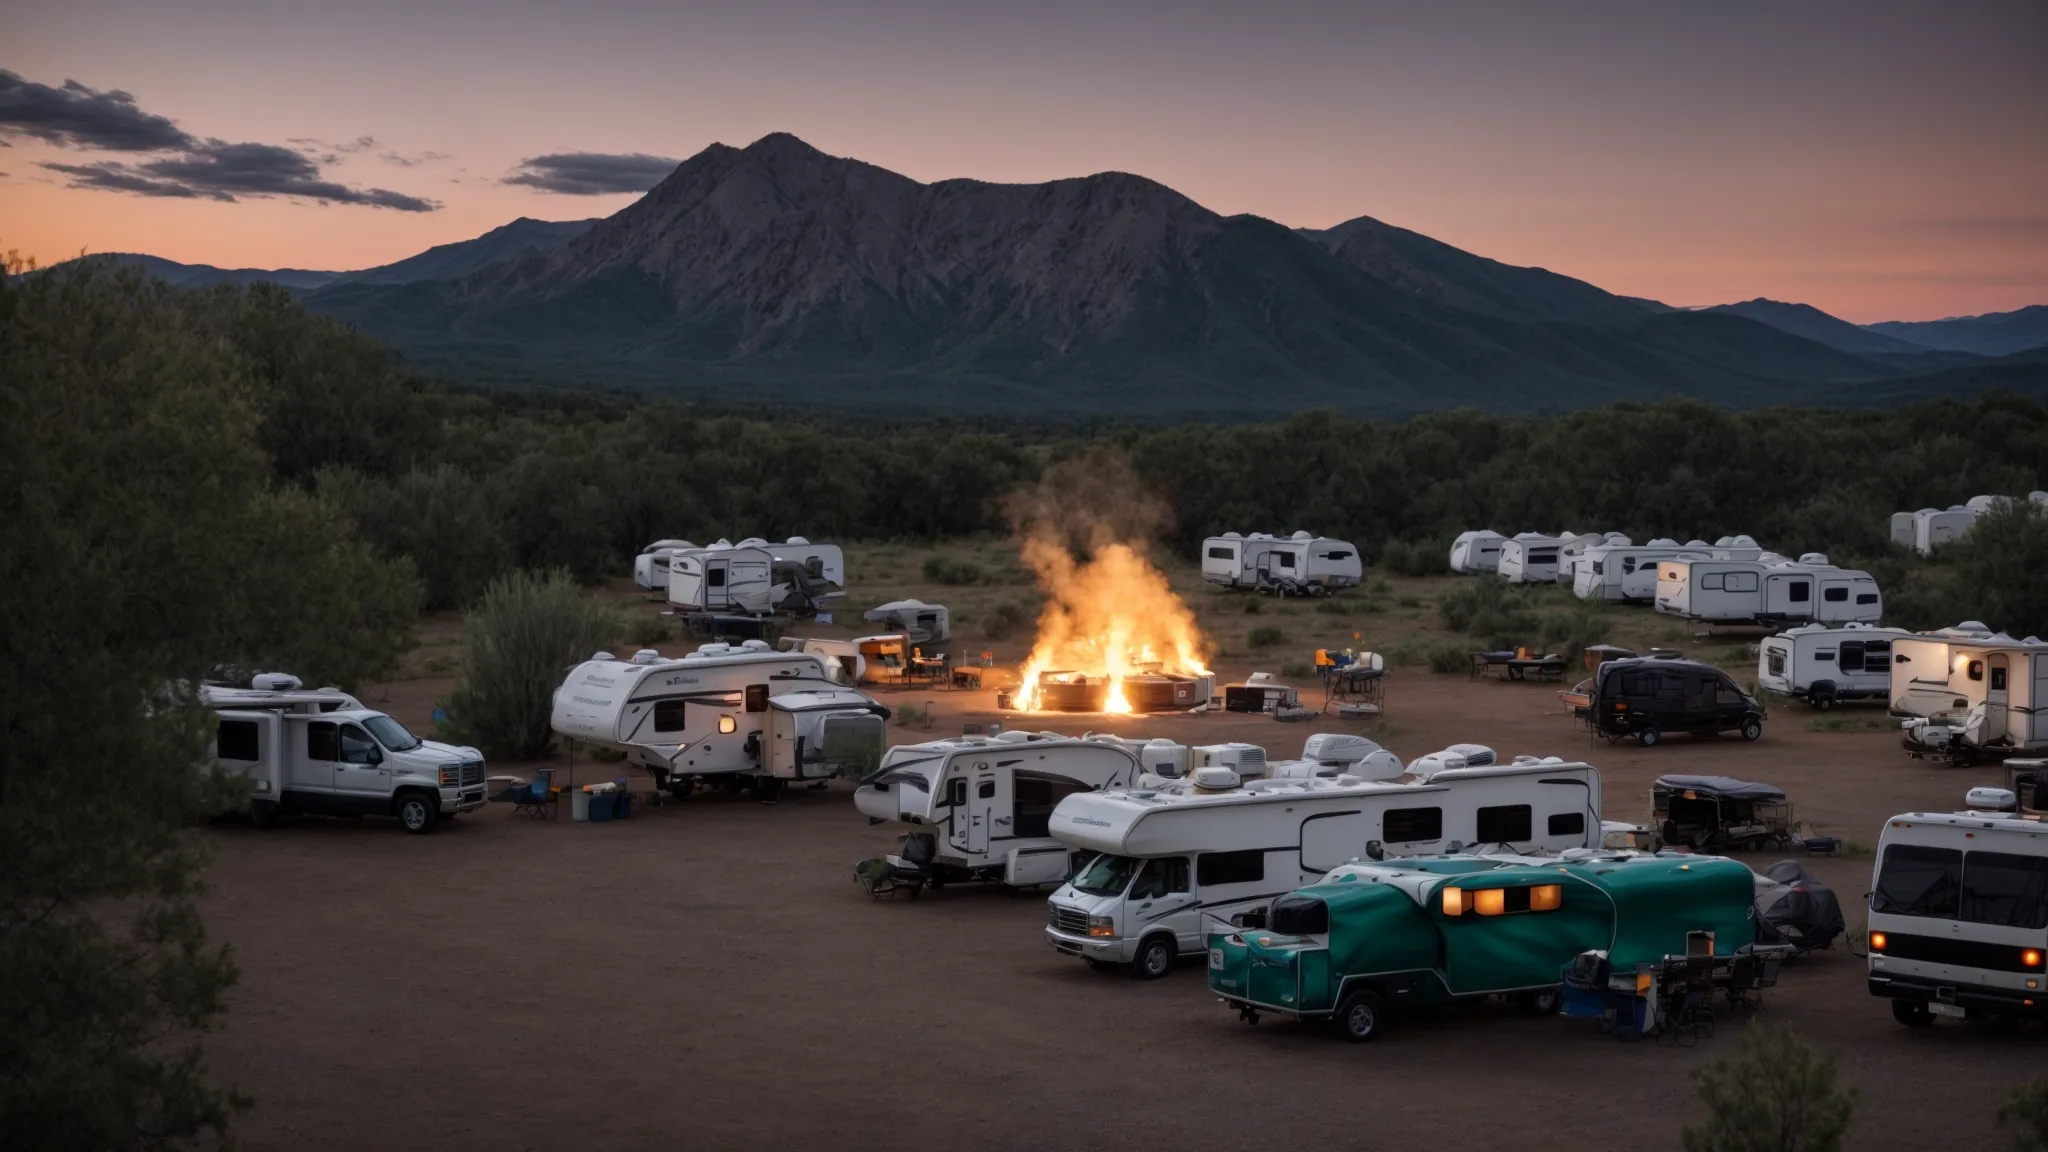 rvs parked in a circle around a central campfire in a scenic, open campground with mountains in the distance.